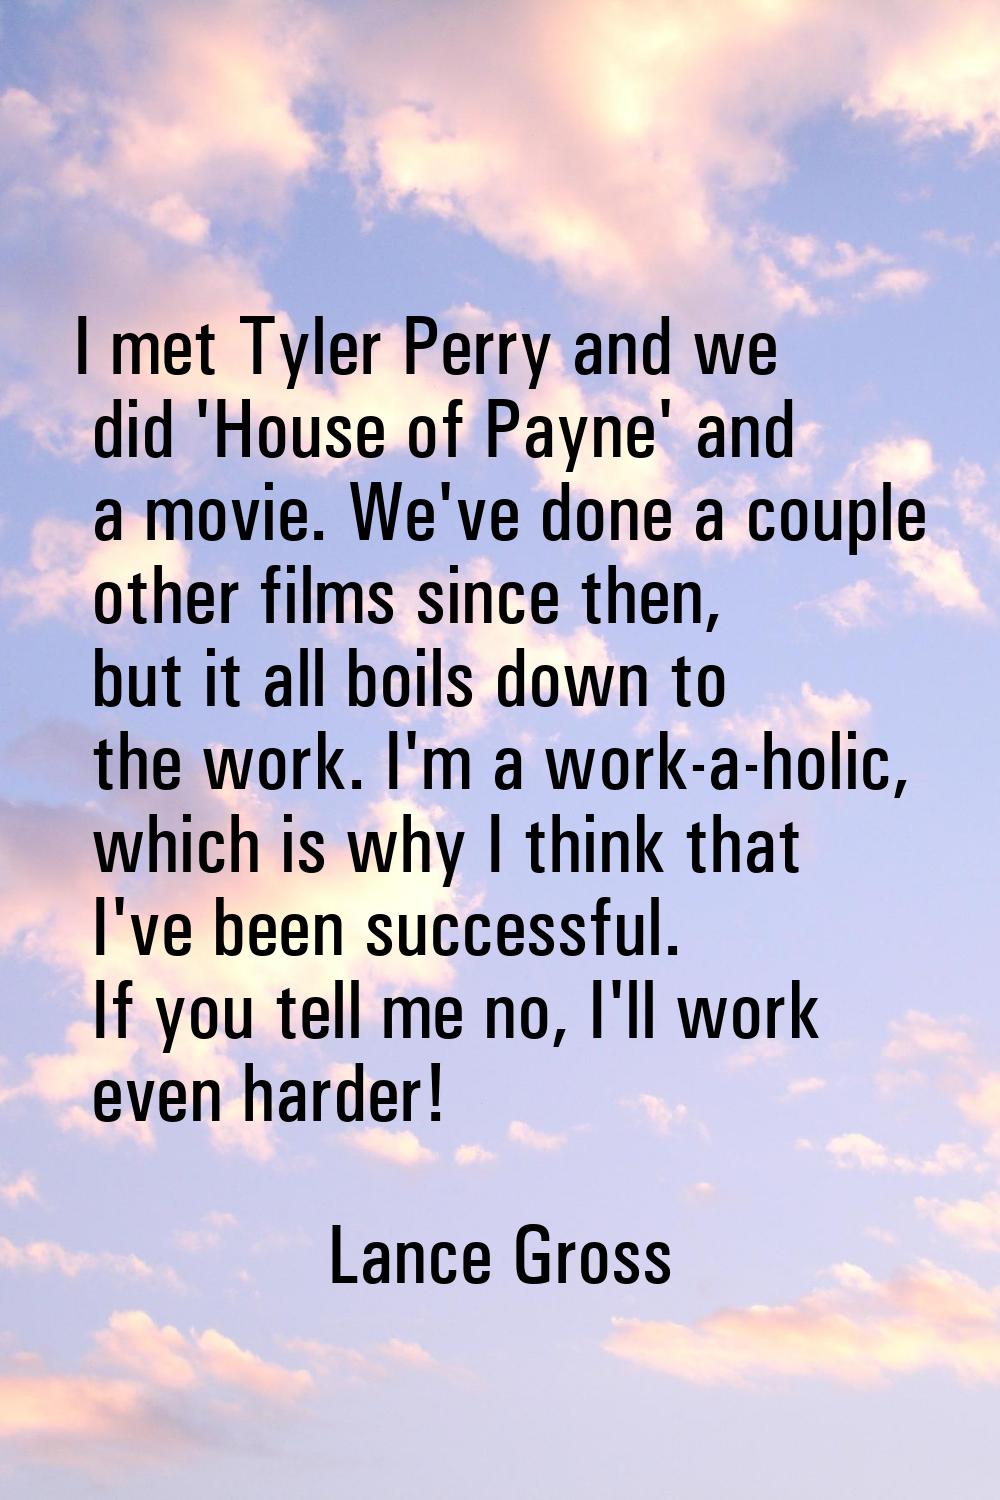 I met Tyler Perry and we did 'House of Payne' and a movie. We've done a couple other films since th